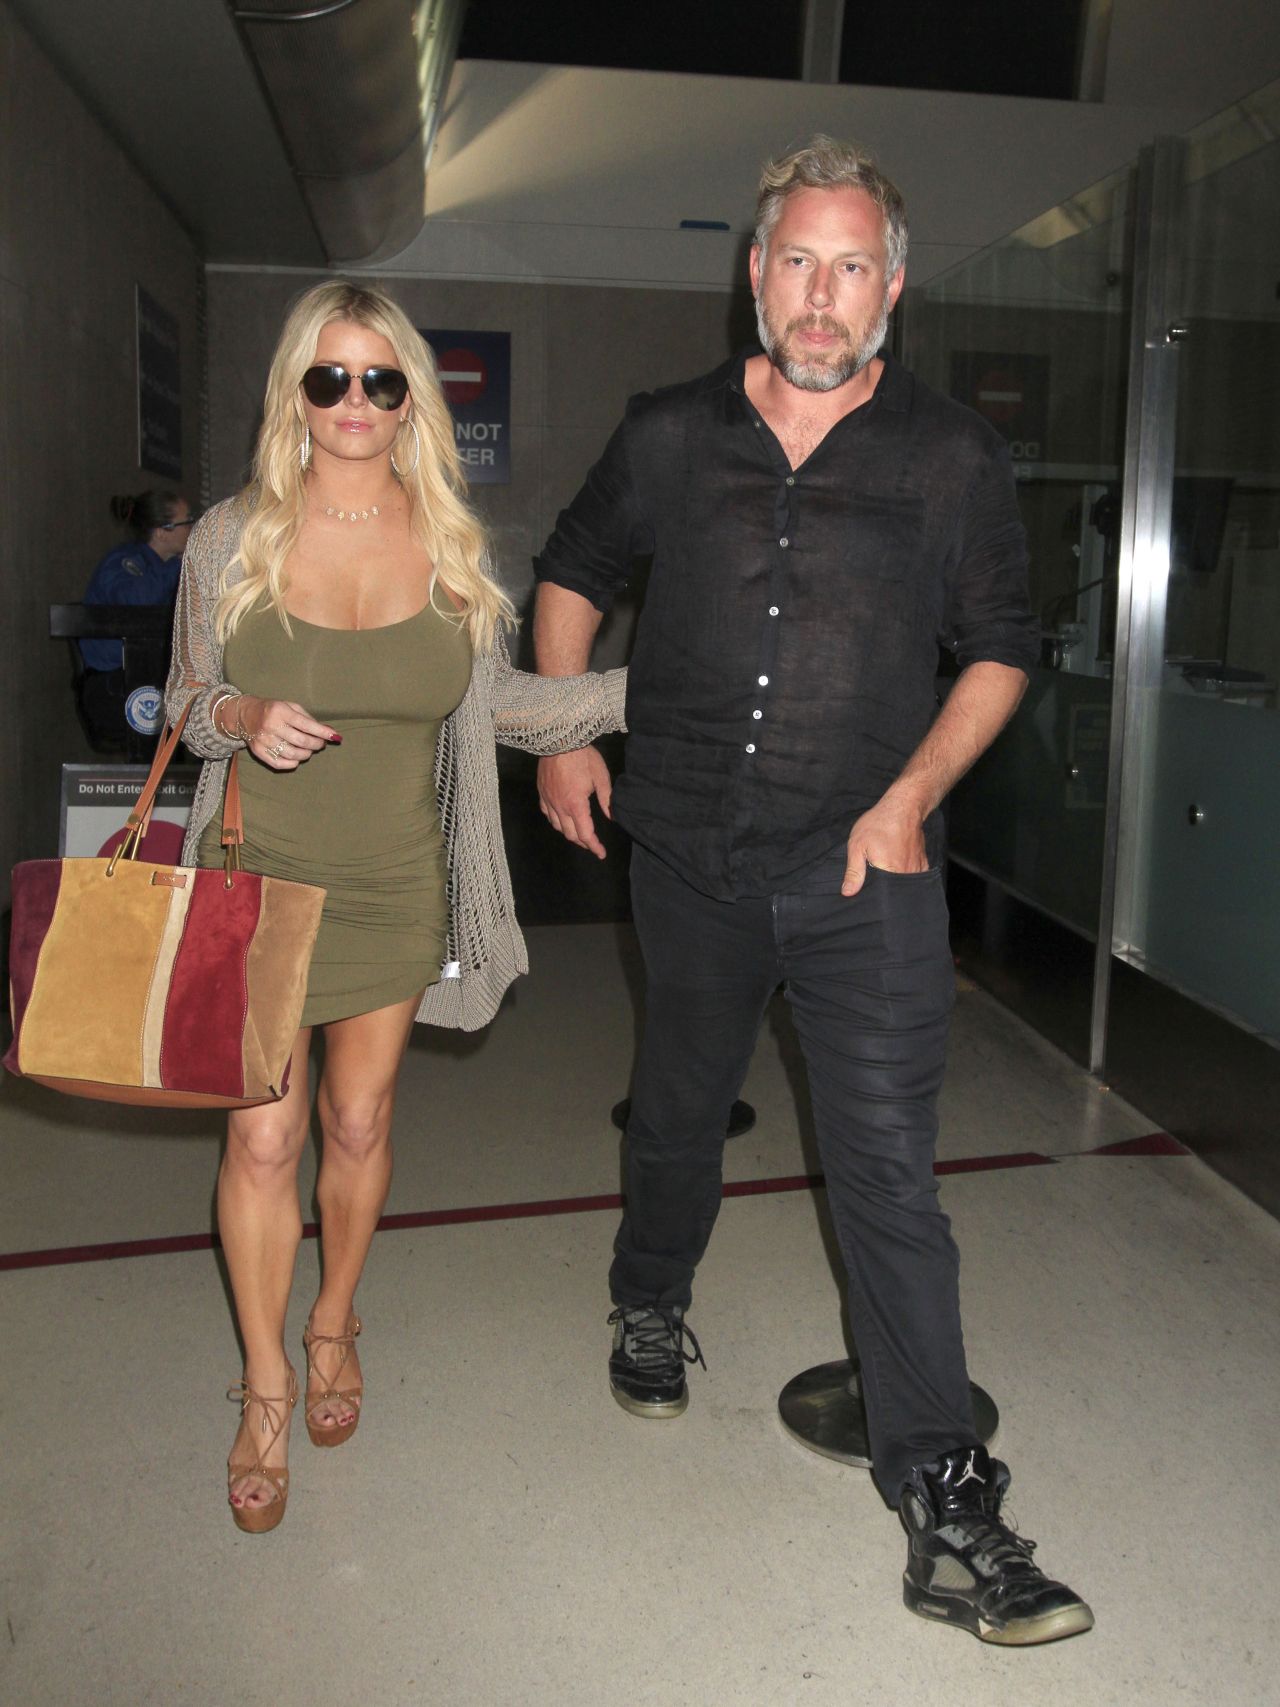 Jessica Simpson LAX Airport in Los Angeles January 4, 2007 – Star